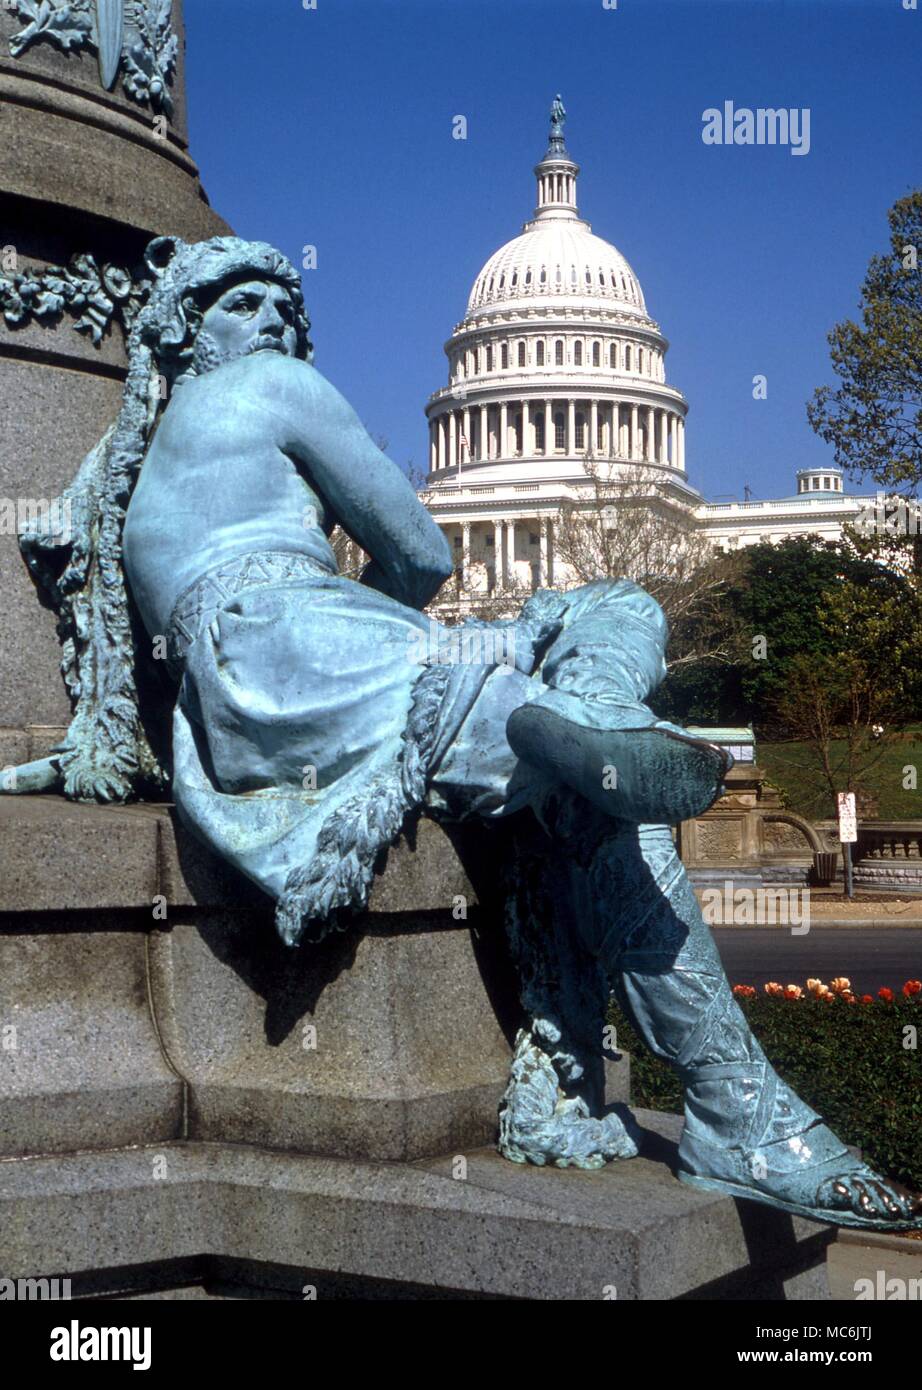 MASONRY - Detail of the statue to Garfield, one of the assassinated Presidents of the United States. Garfield was a well-known Mason, and there are many masonic details on the statue. Washington DC Stock Photo